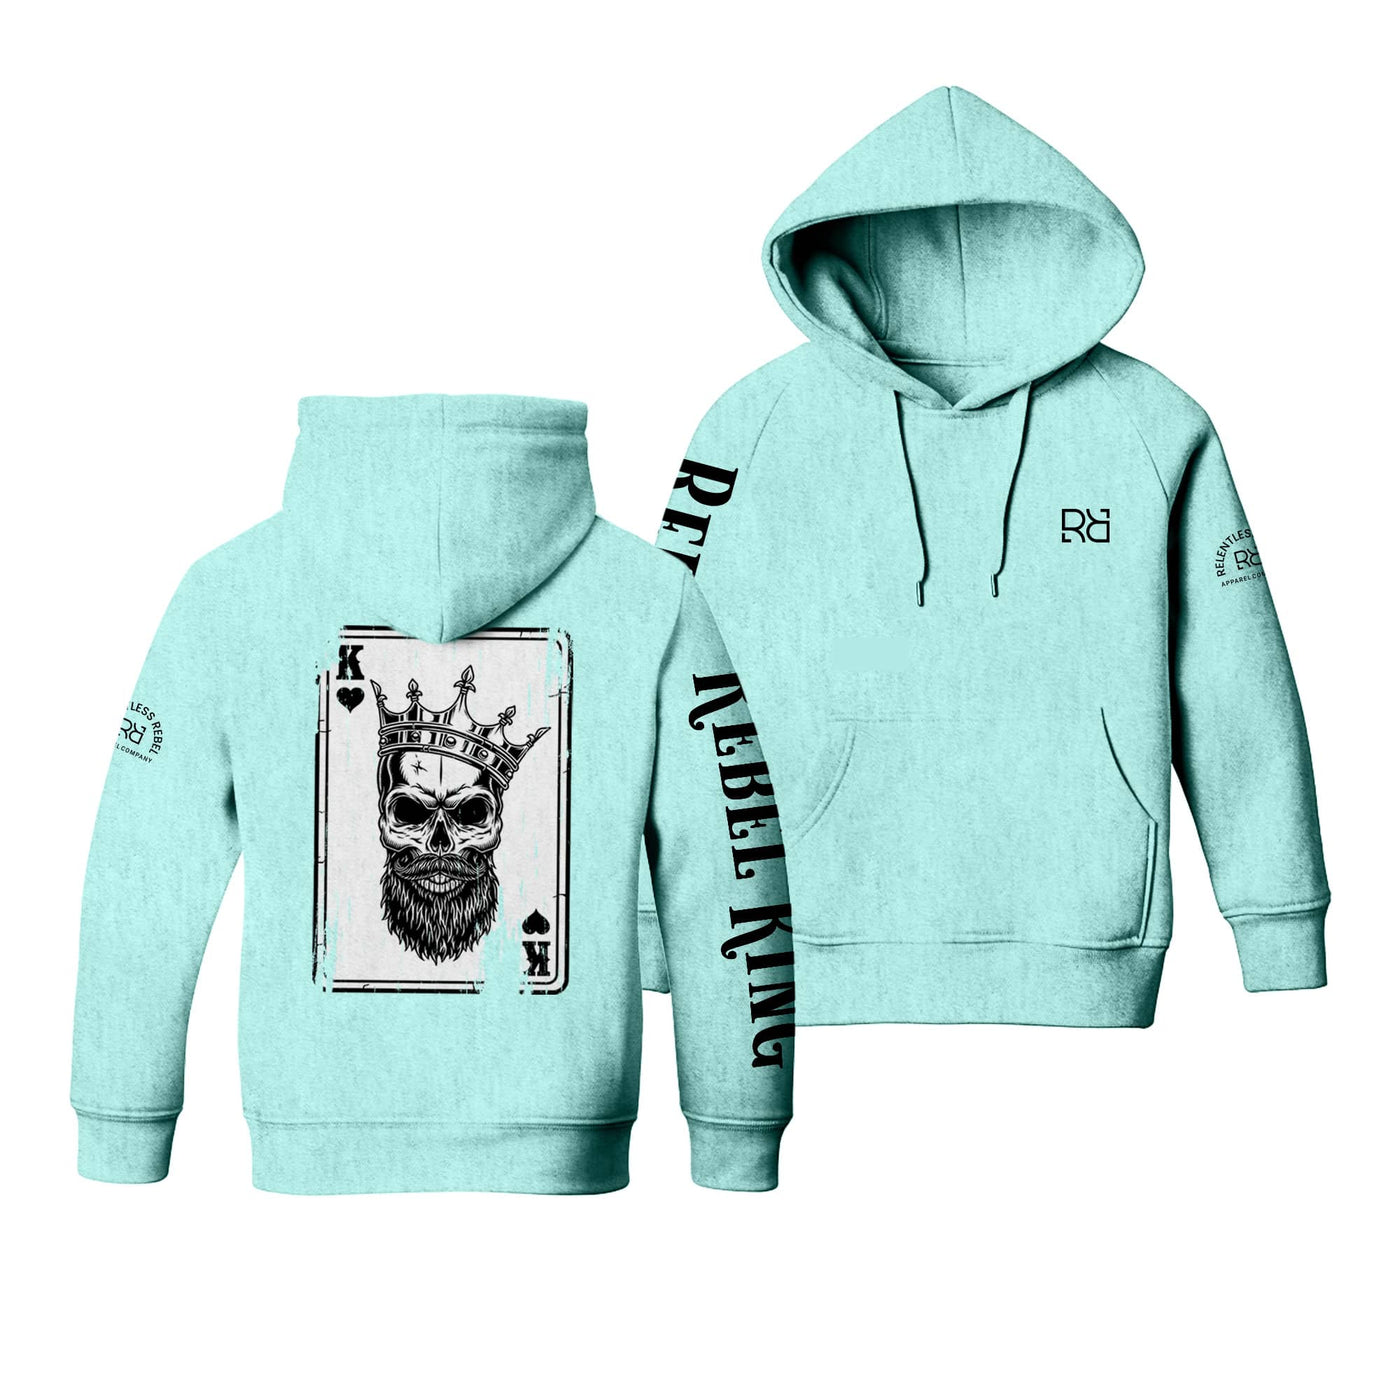 Mint Youth Rebel King - Ace Sleeve and Back Design Hoodie